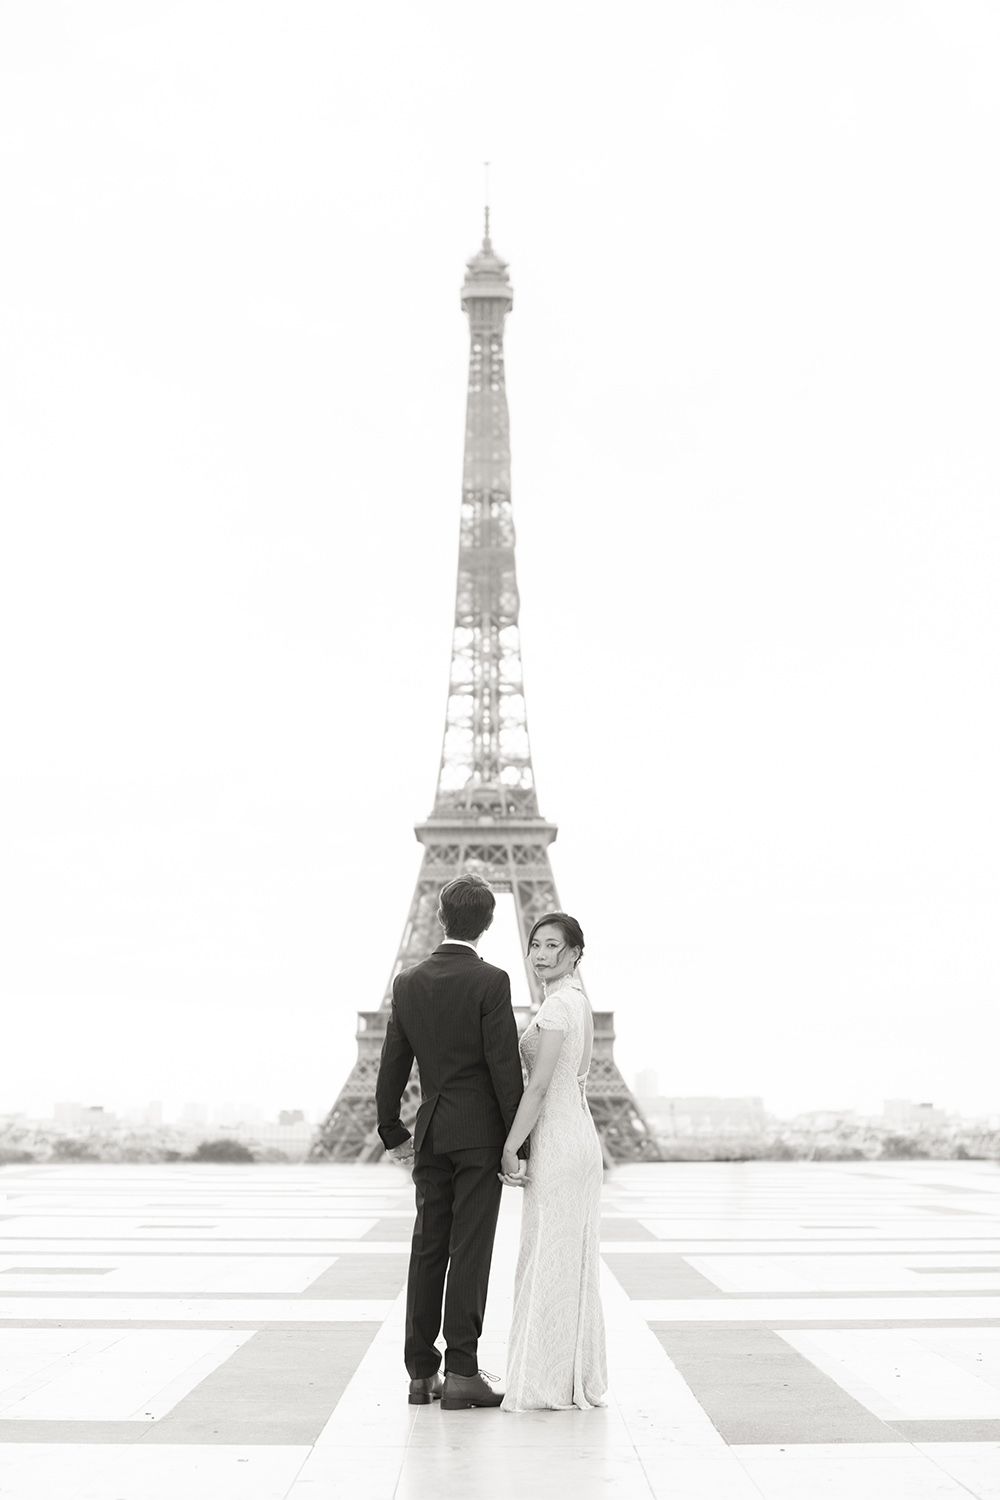 photo black and with in paris wth view on the eiffel tower with couple